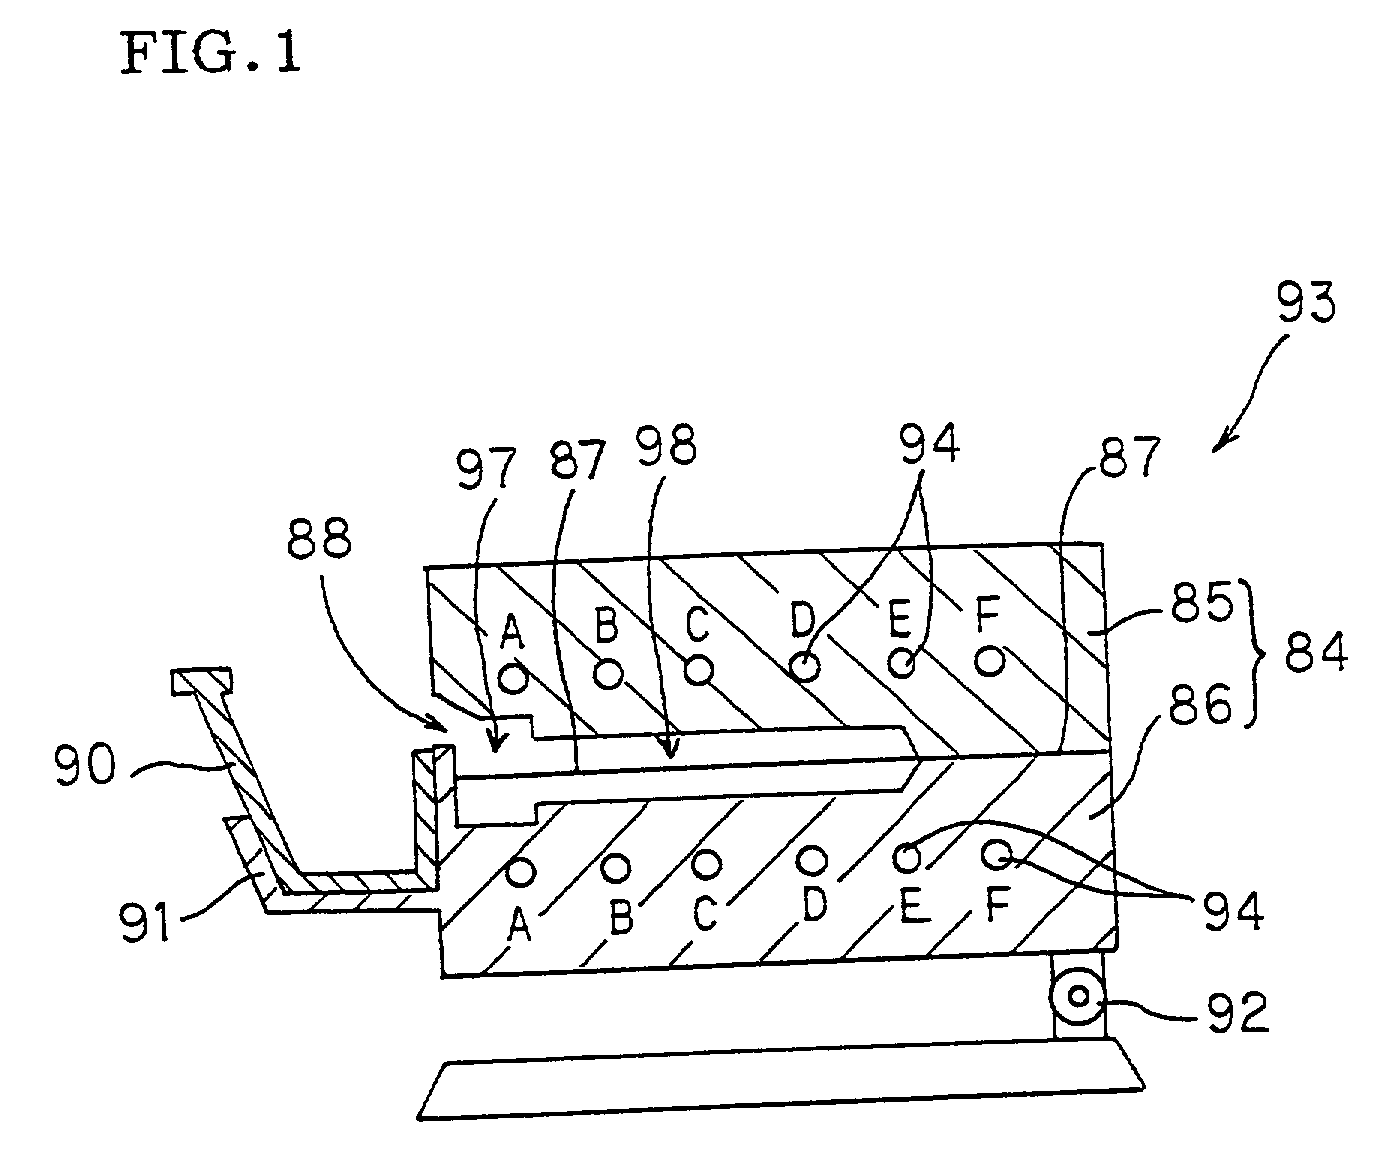 Mold for casting forged material, and method for casting forged material